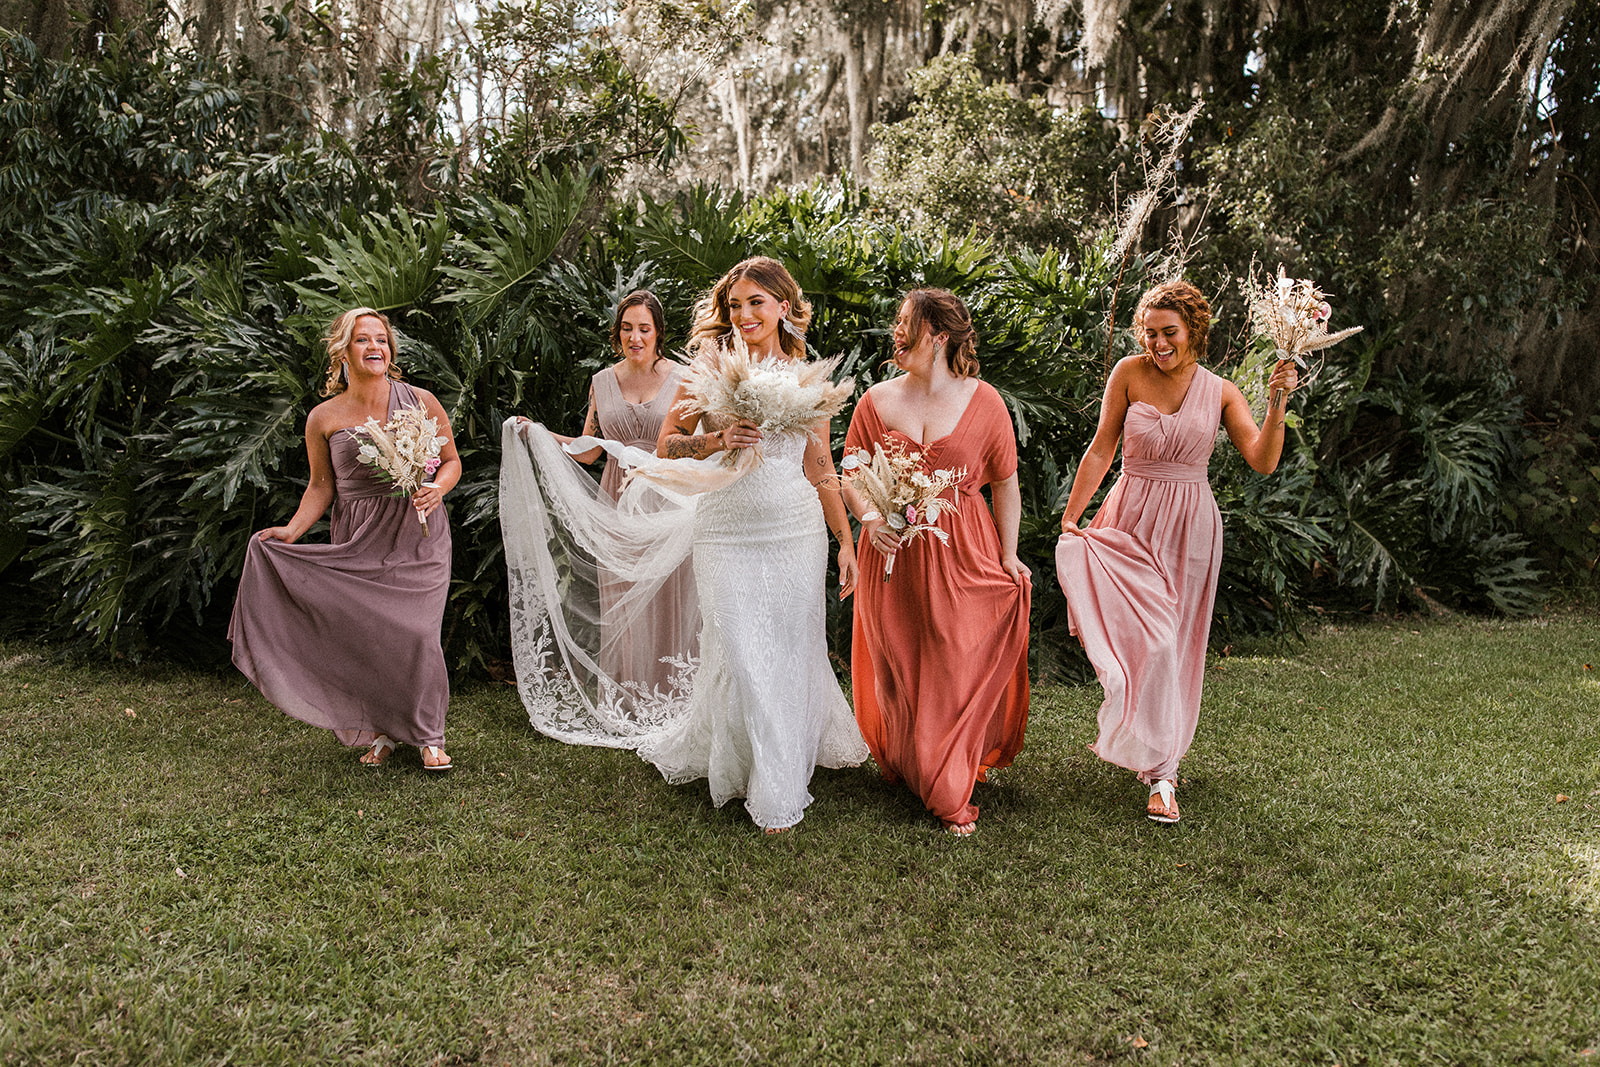 Bridesmaids in Mismatched Gowns Walking with Real Bride Wearing Maggie Sottero Sheath Wedding Dress